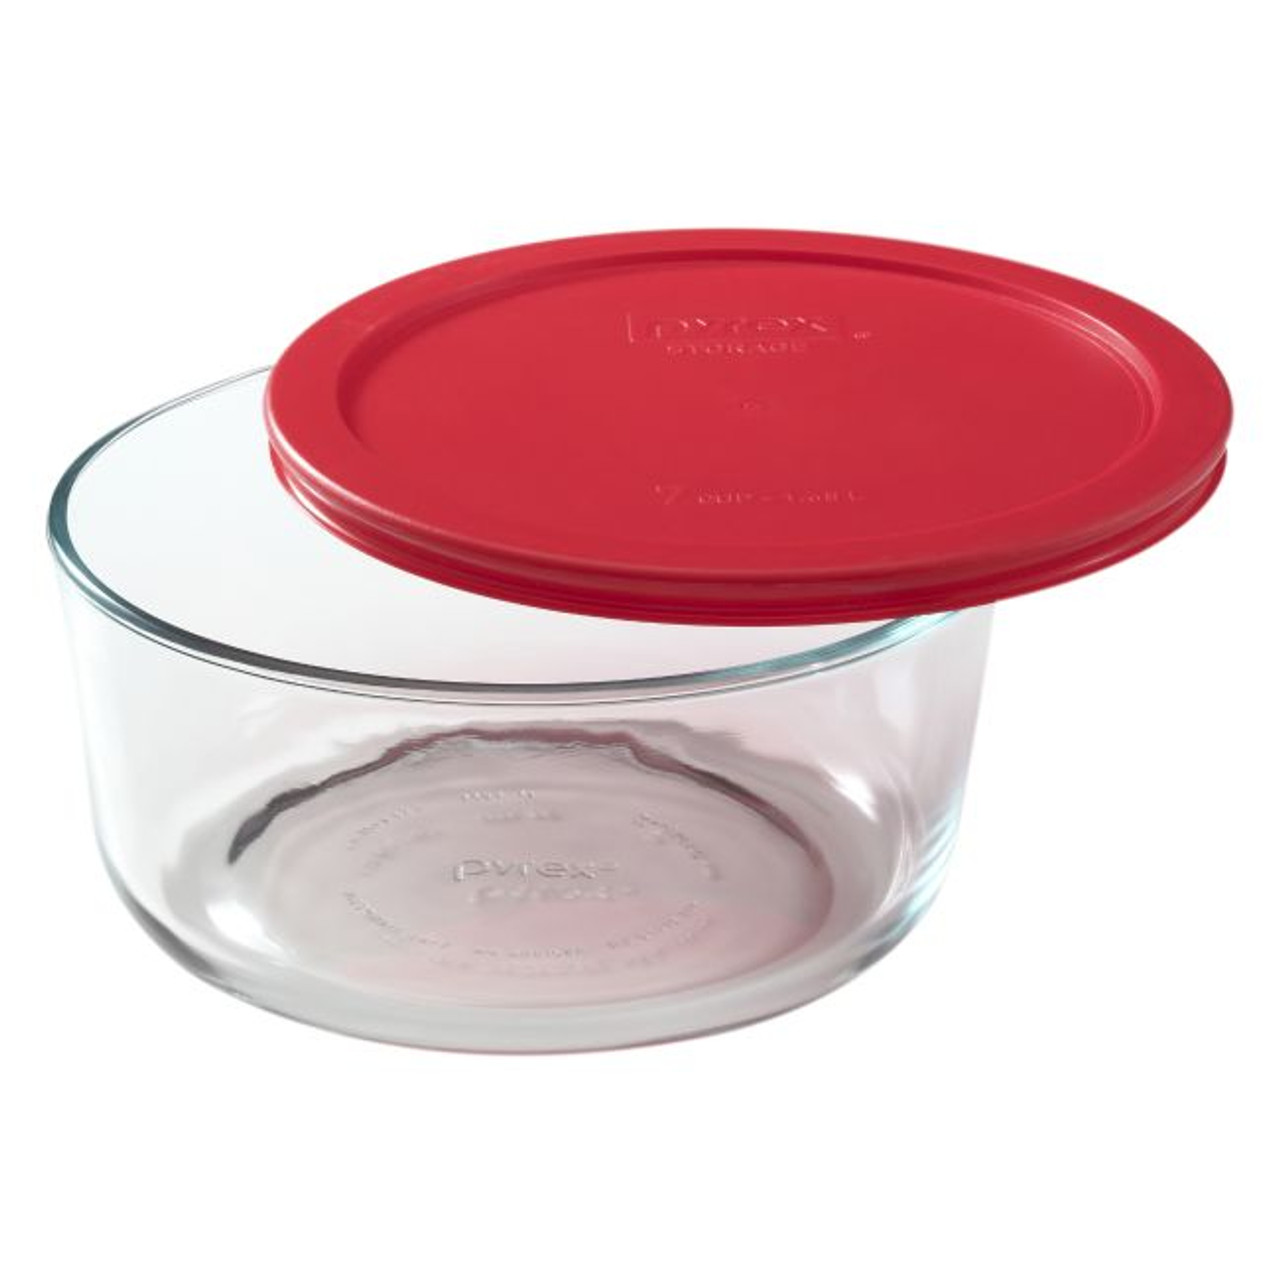 Pyrex 7203 Round Glass Food Storage Bowl w/ 7402-PC Red Plastic Lid Cover